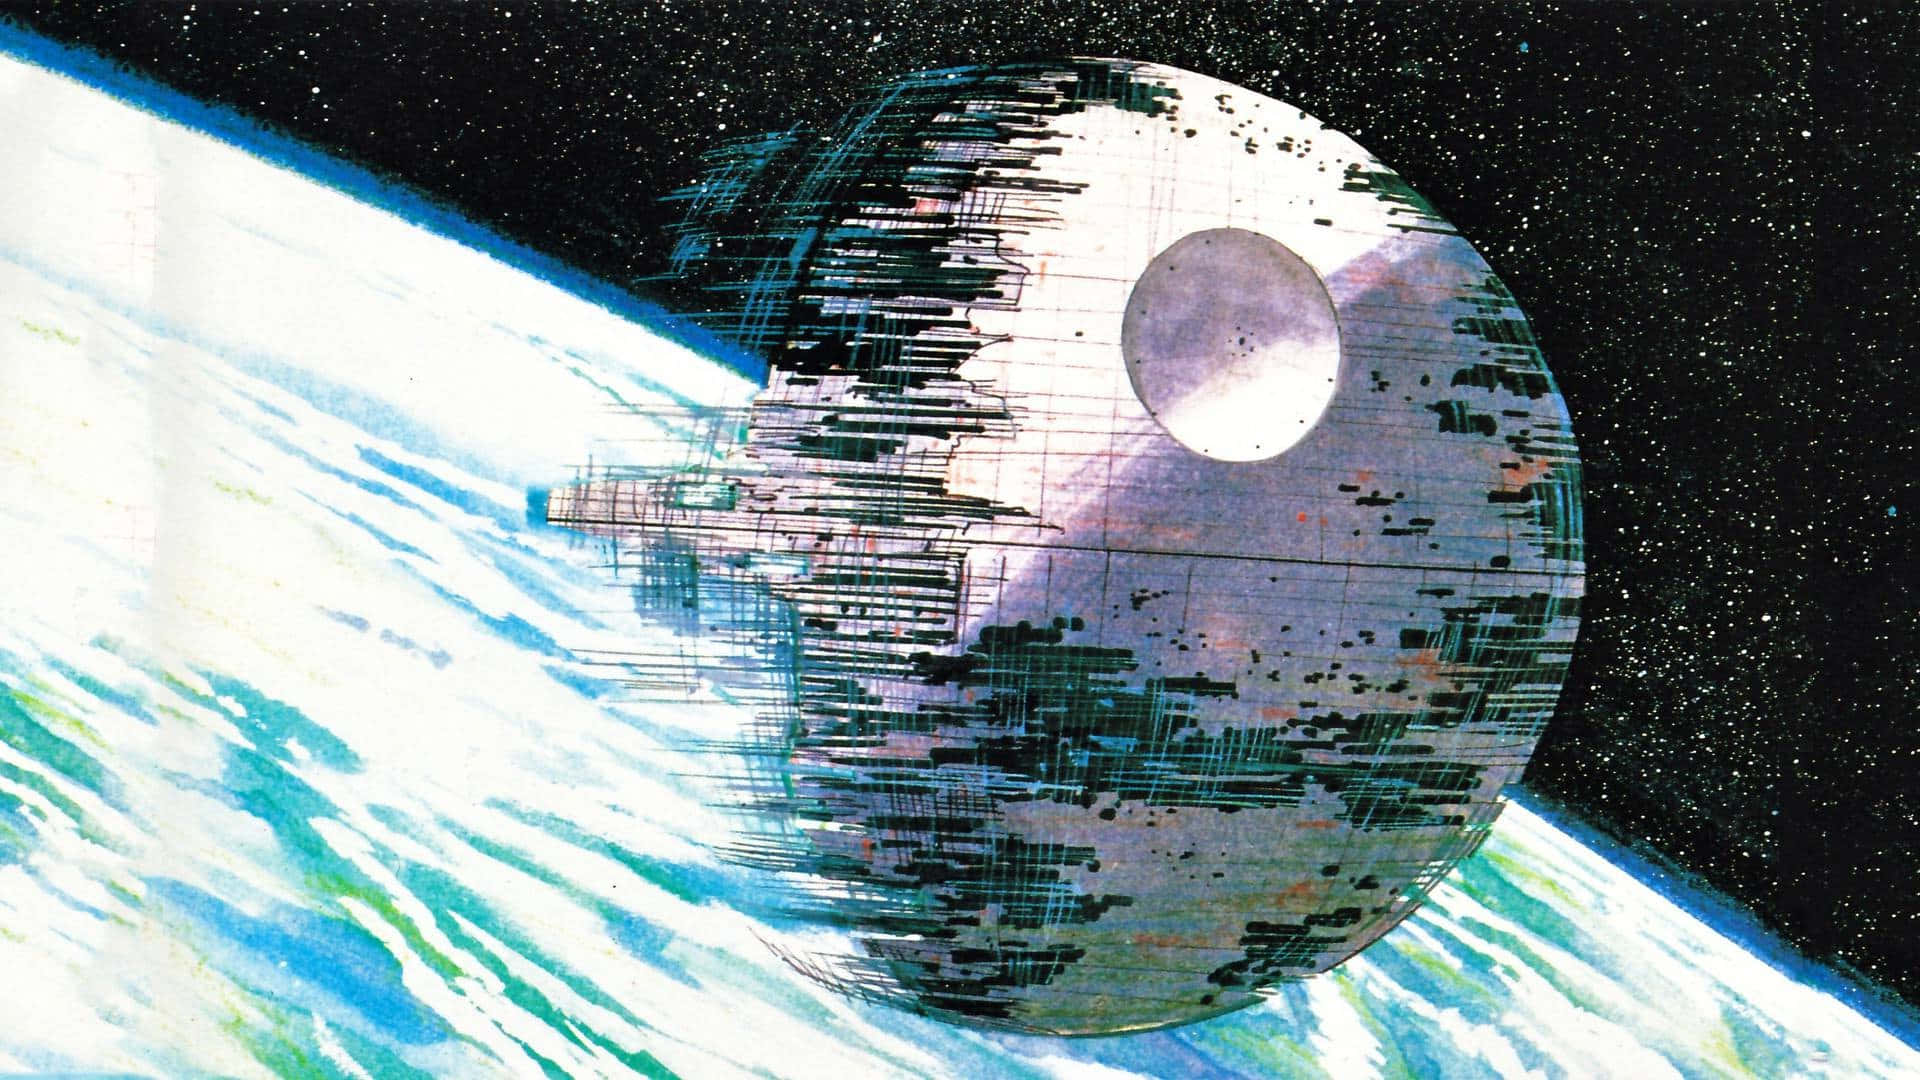 Imposing Death Star Looming In The Deep Space